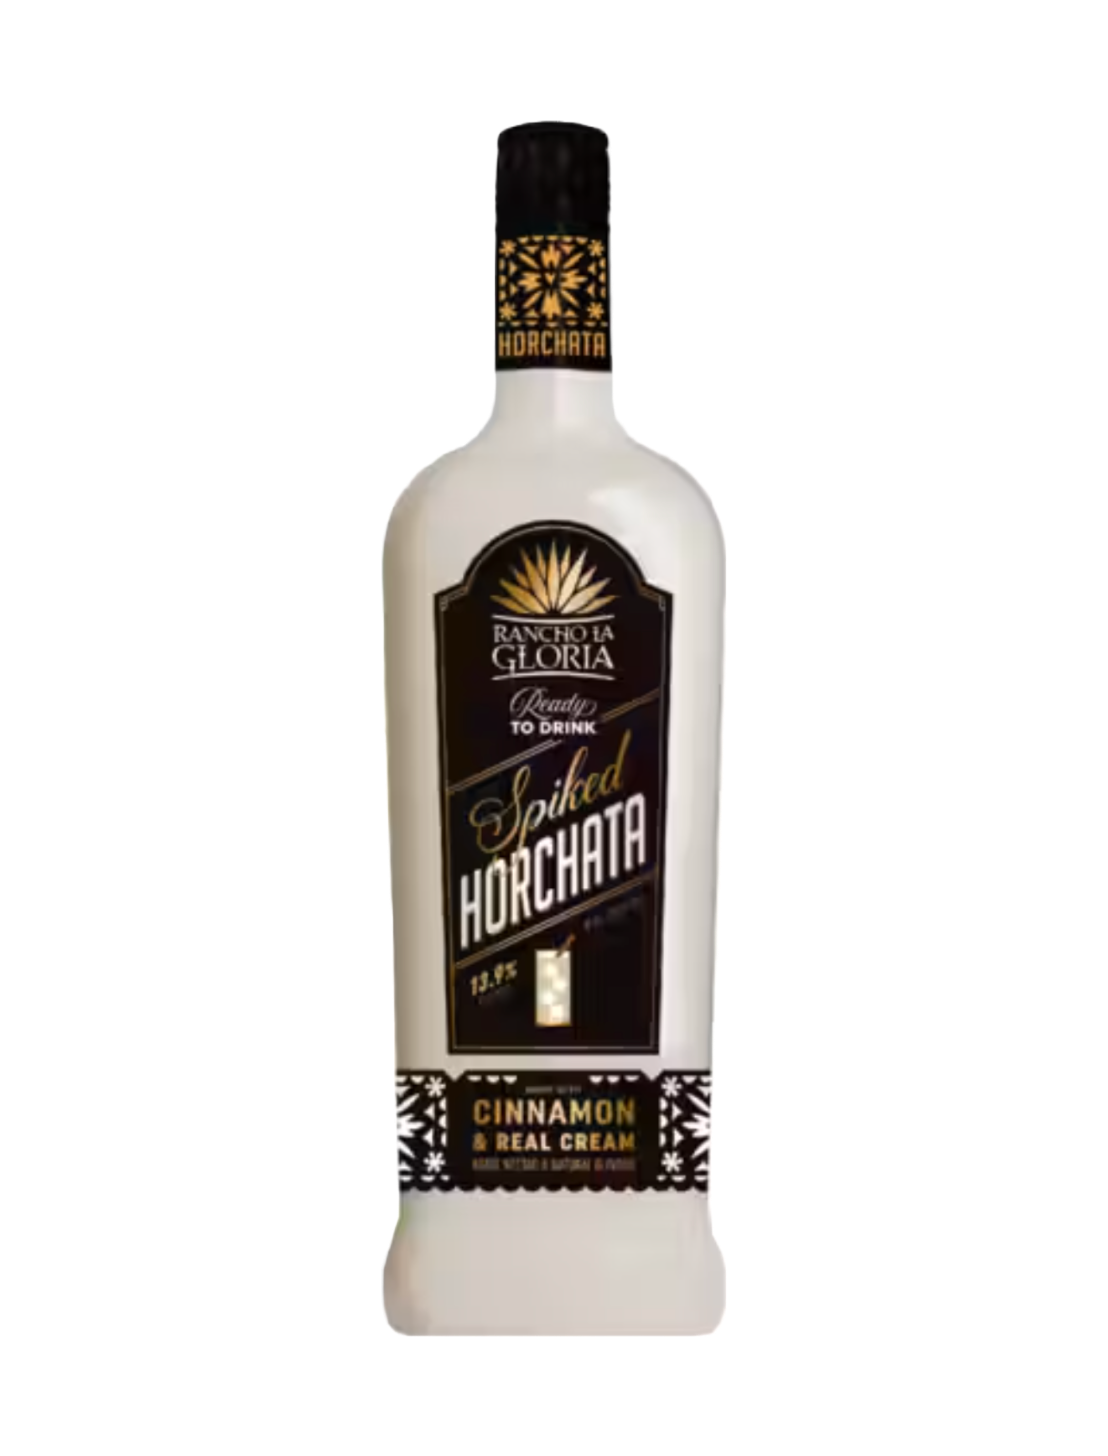 A bottle of Rancho La Gloria Spiked Horchata in front of a plain white background